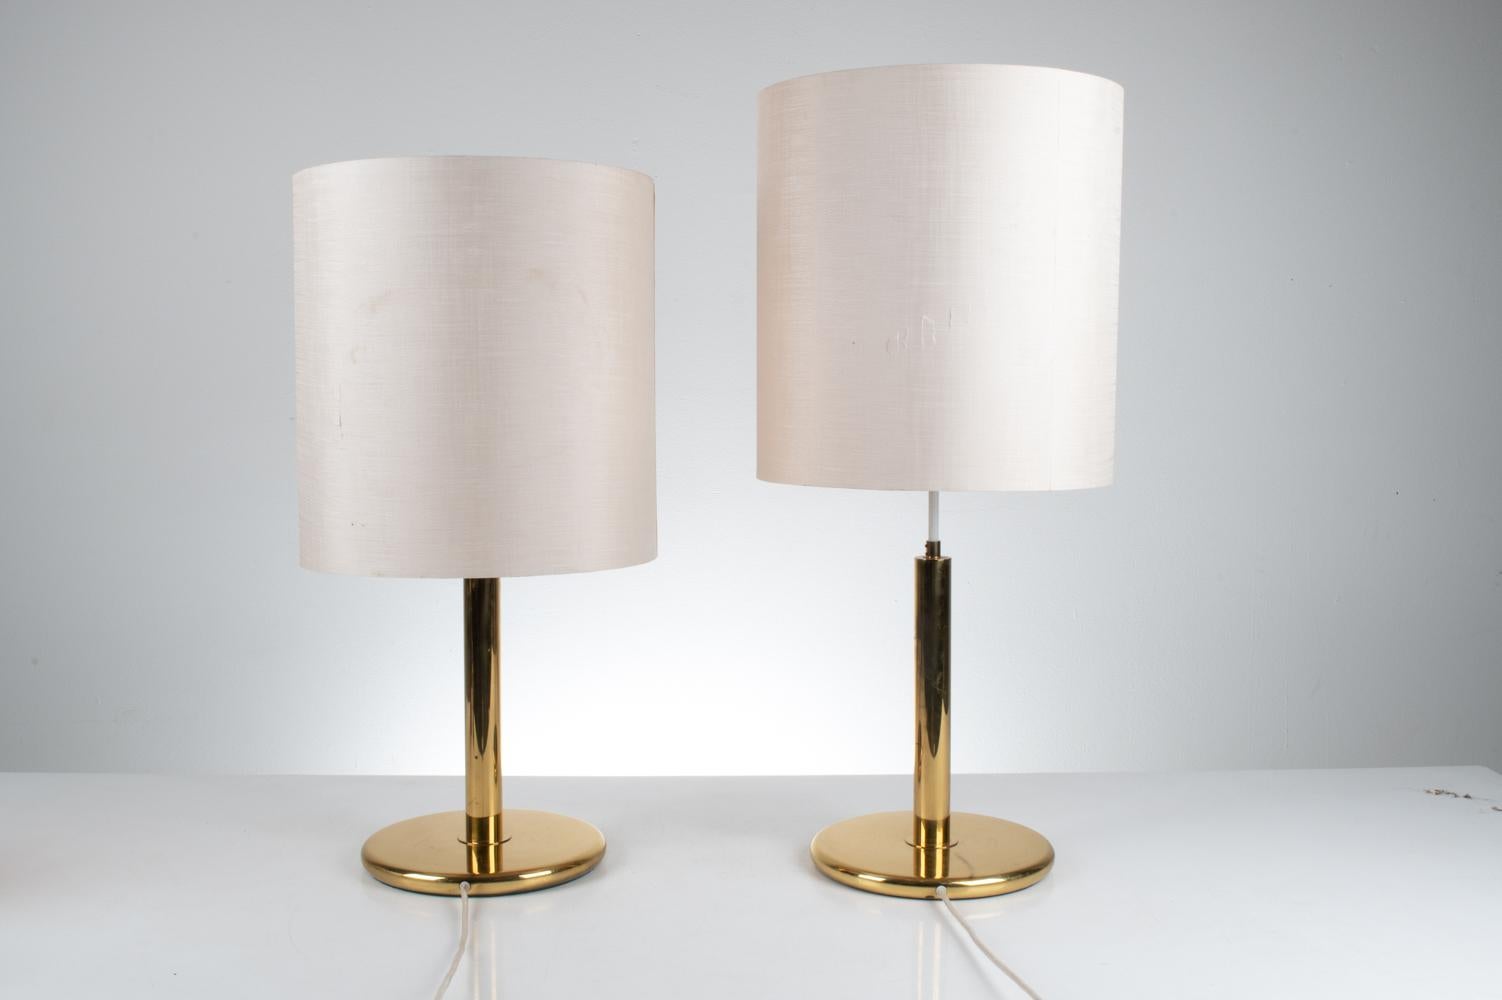 Pair of 1970's Hollywood Regency Revival Adjustable-Height Brass Table Lamps In Good Condition For Sale In Norwalk, CT